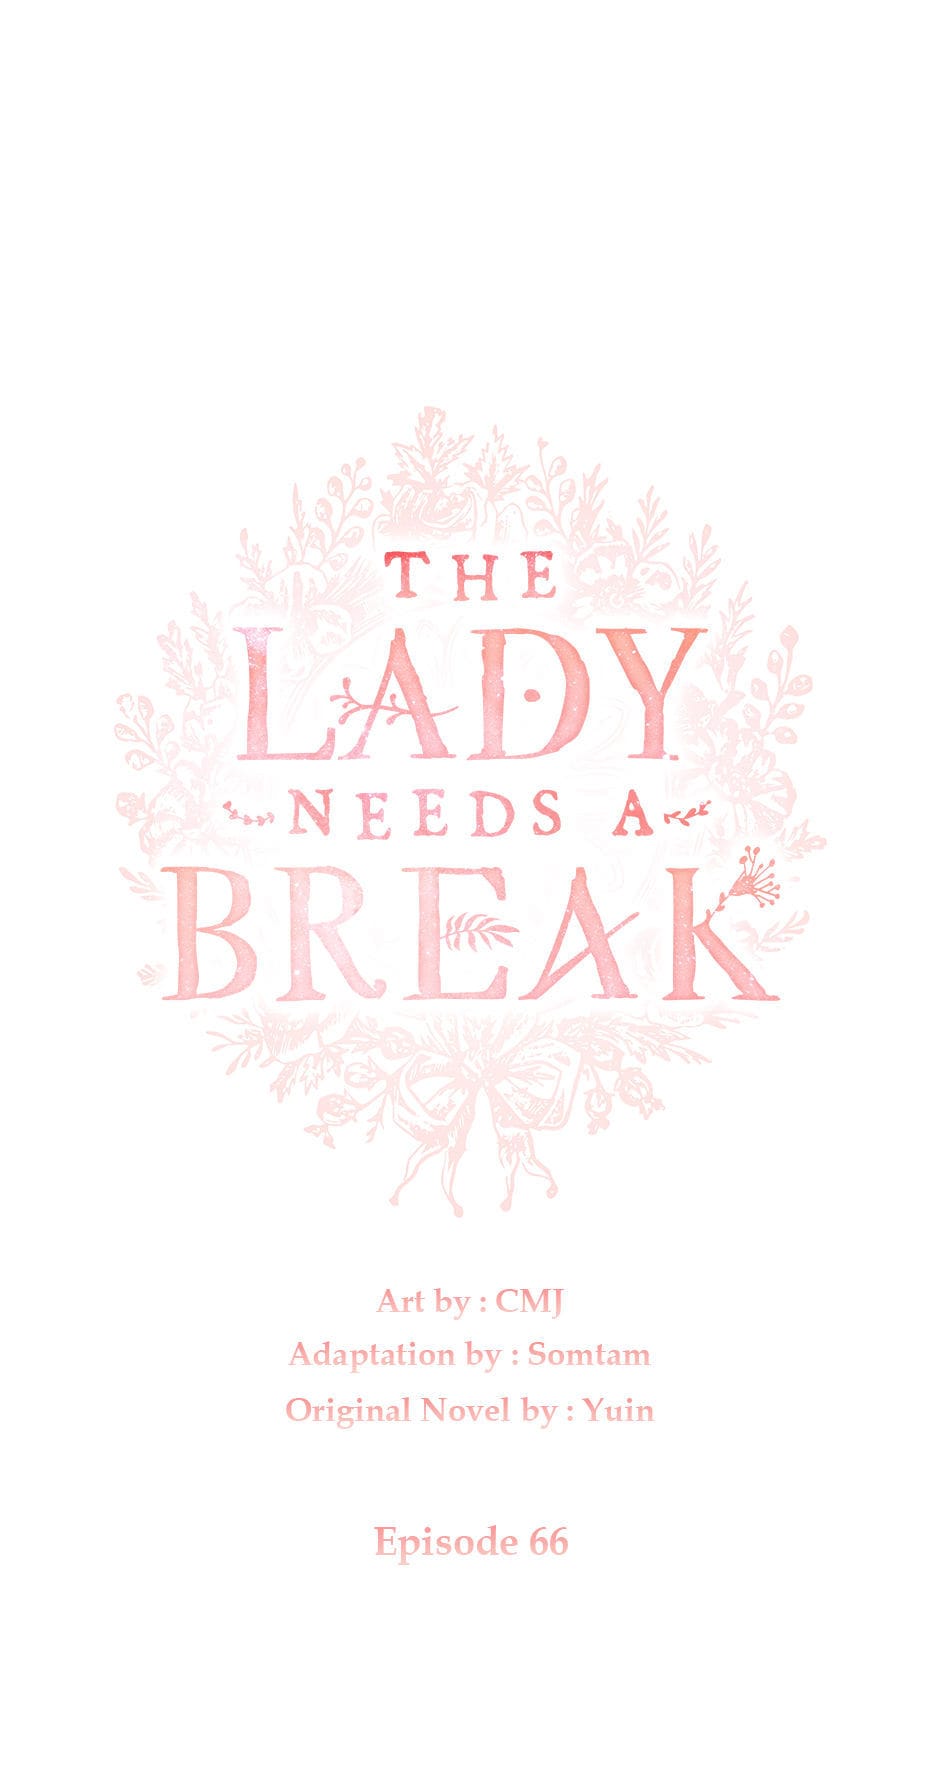 The Lady Wants to Rest chapter 66